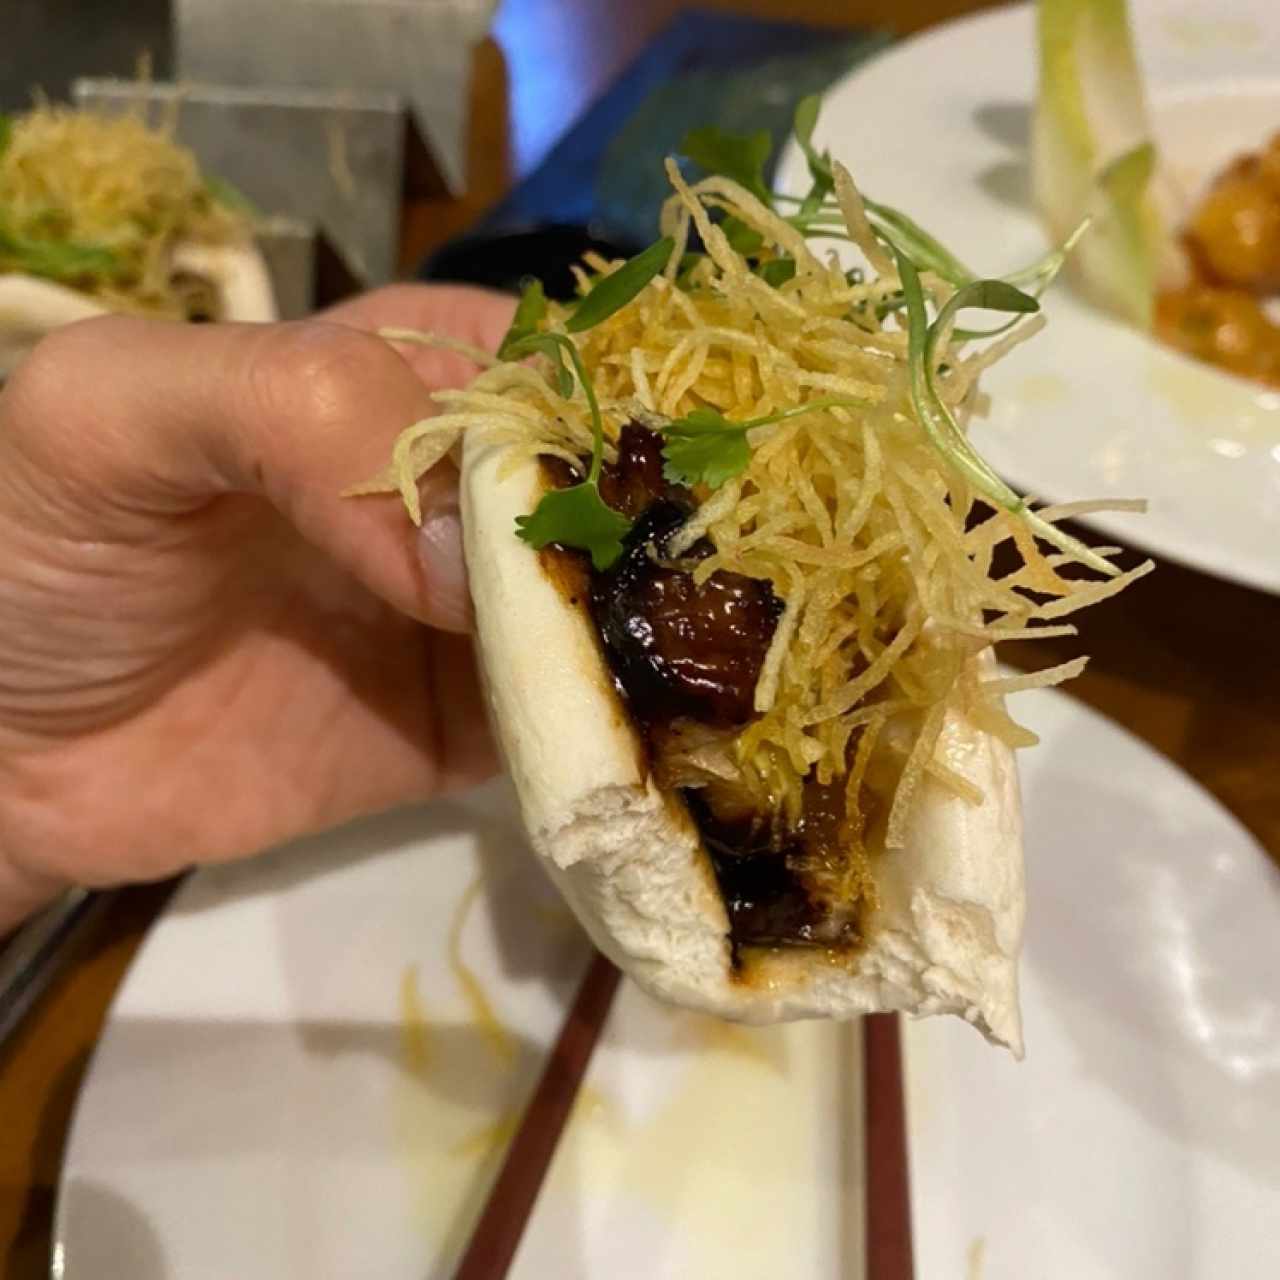 To Share - Steam Buns